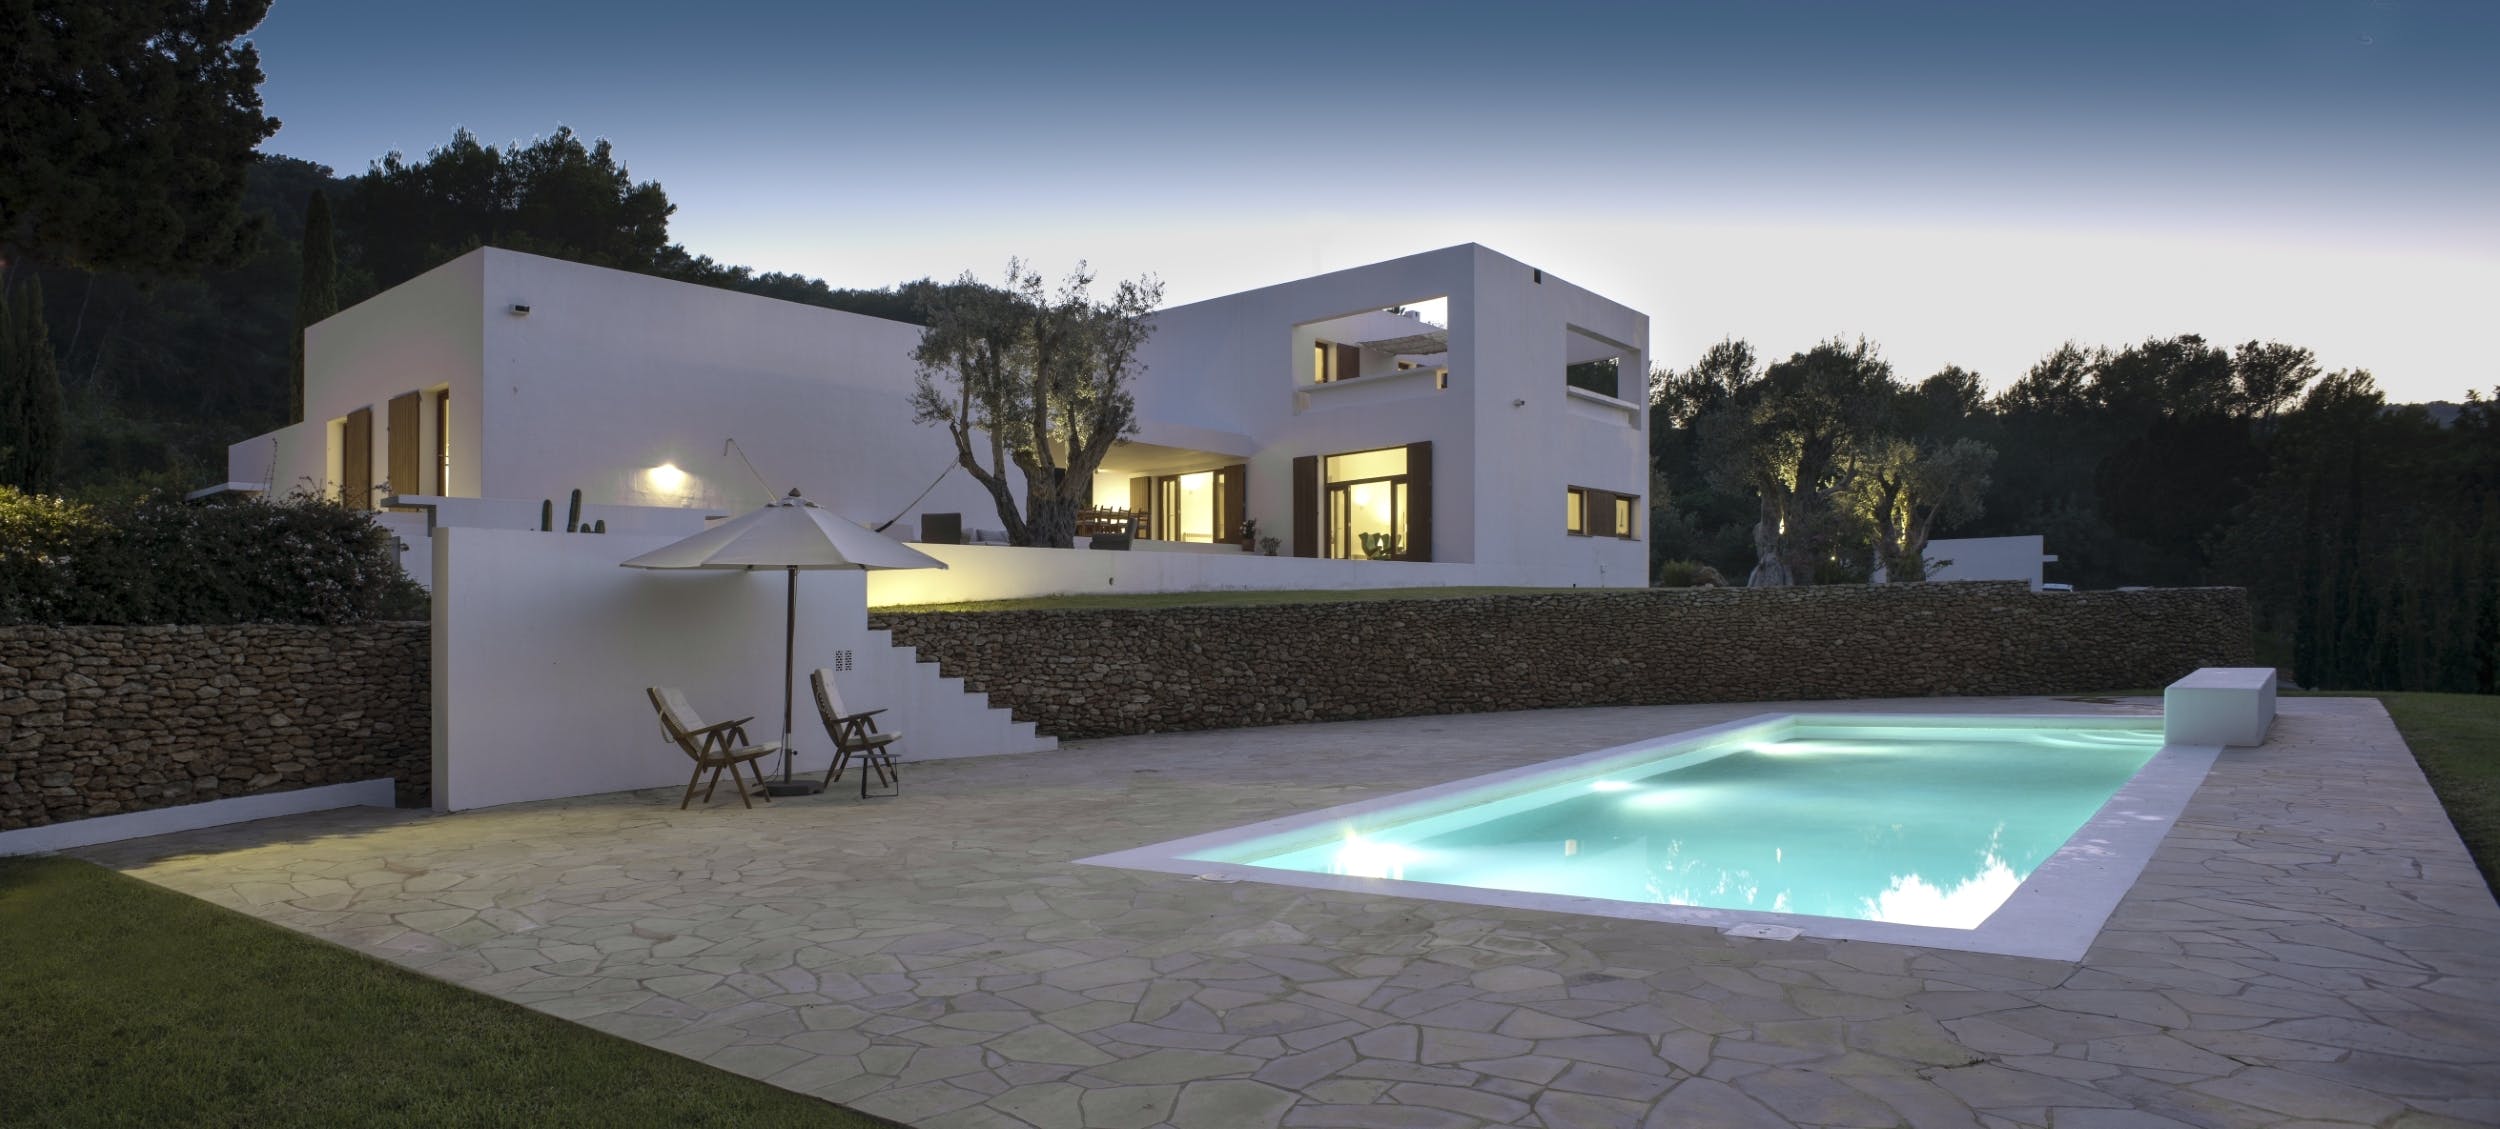 You are currently viewing Can Perez – ‘Hidden gem in the north-east of Ibiza.’